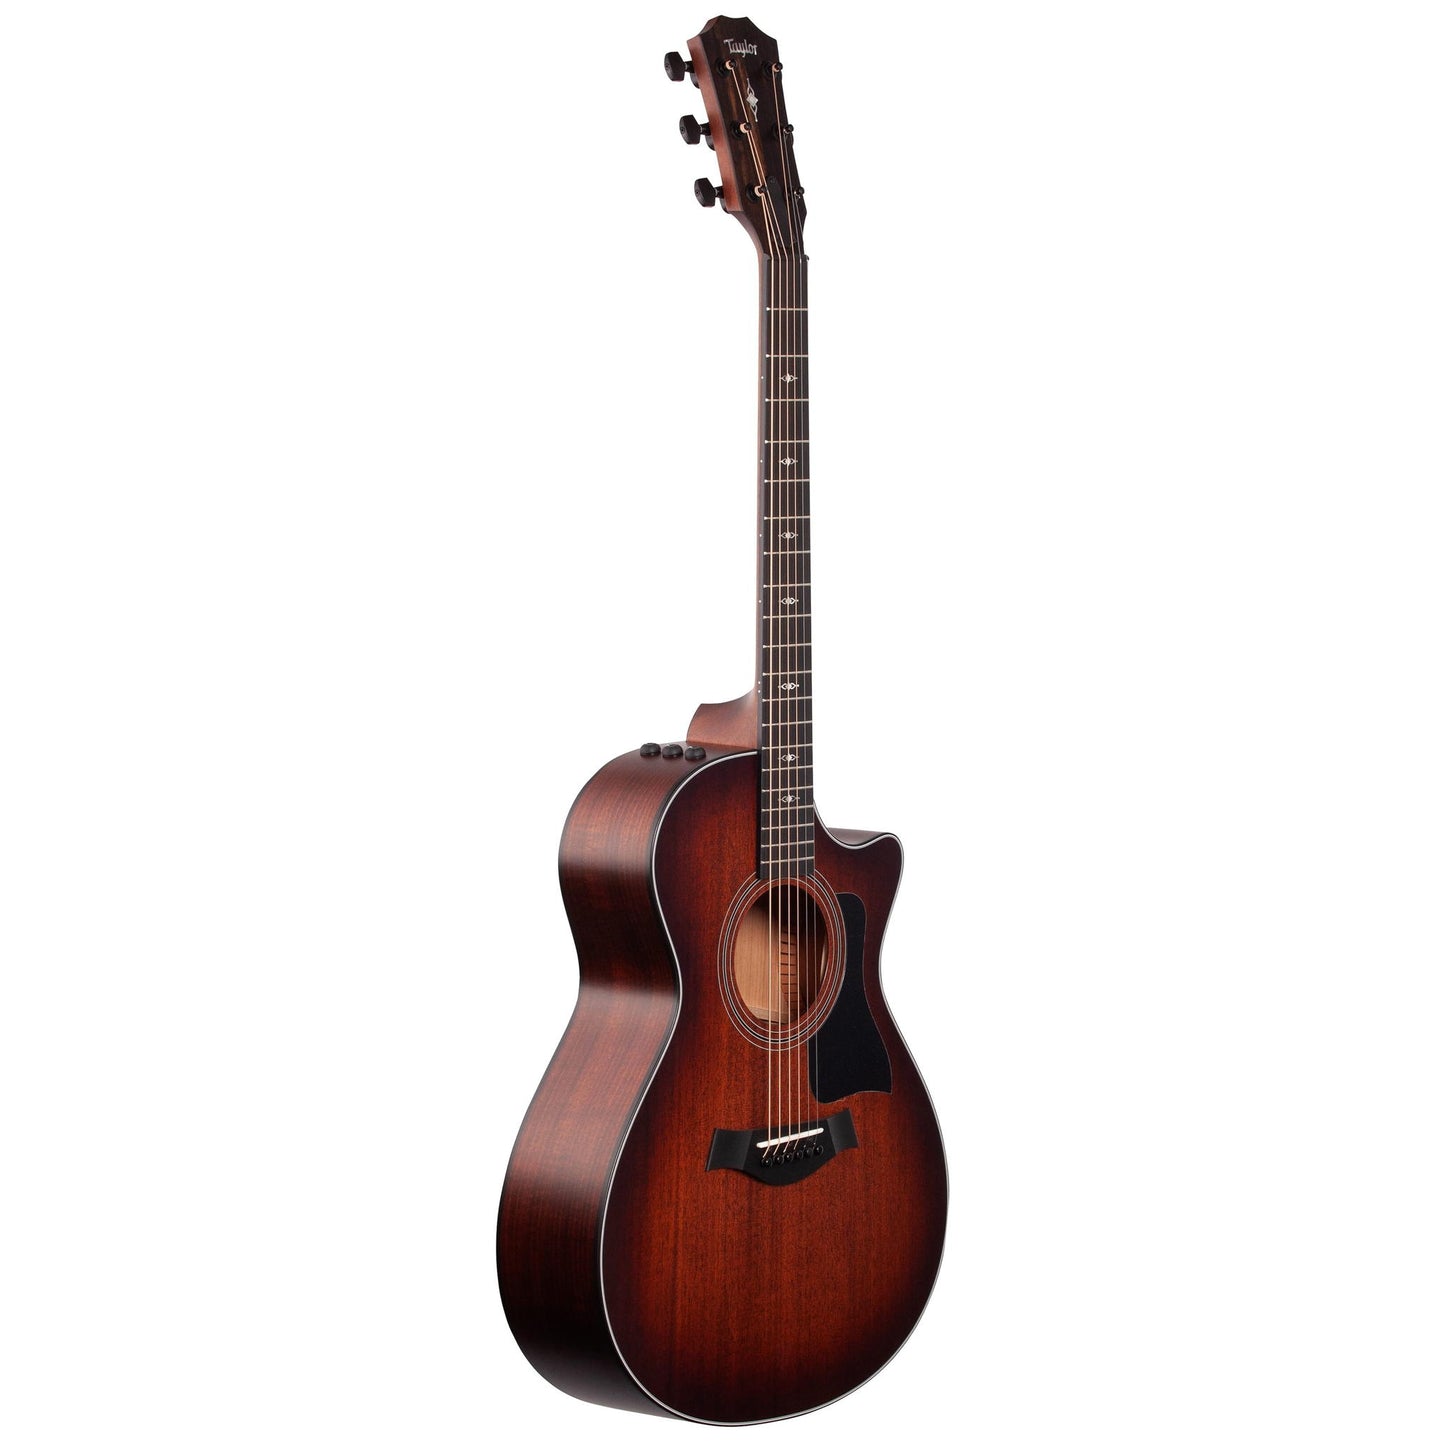 Taylor 322ce Acoustic-Electric Guitar, Shaded Edge Burst